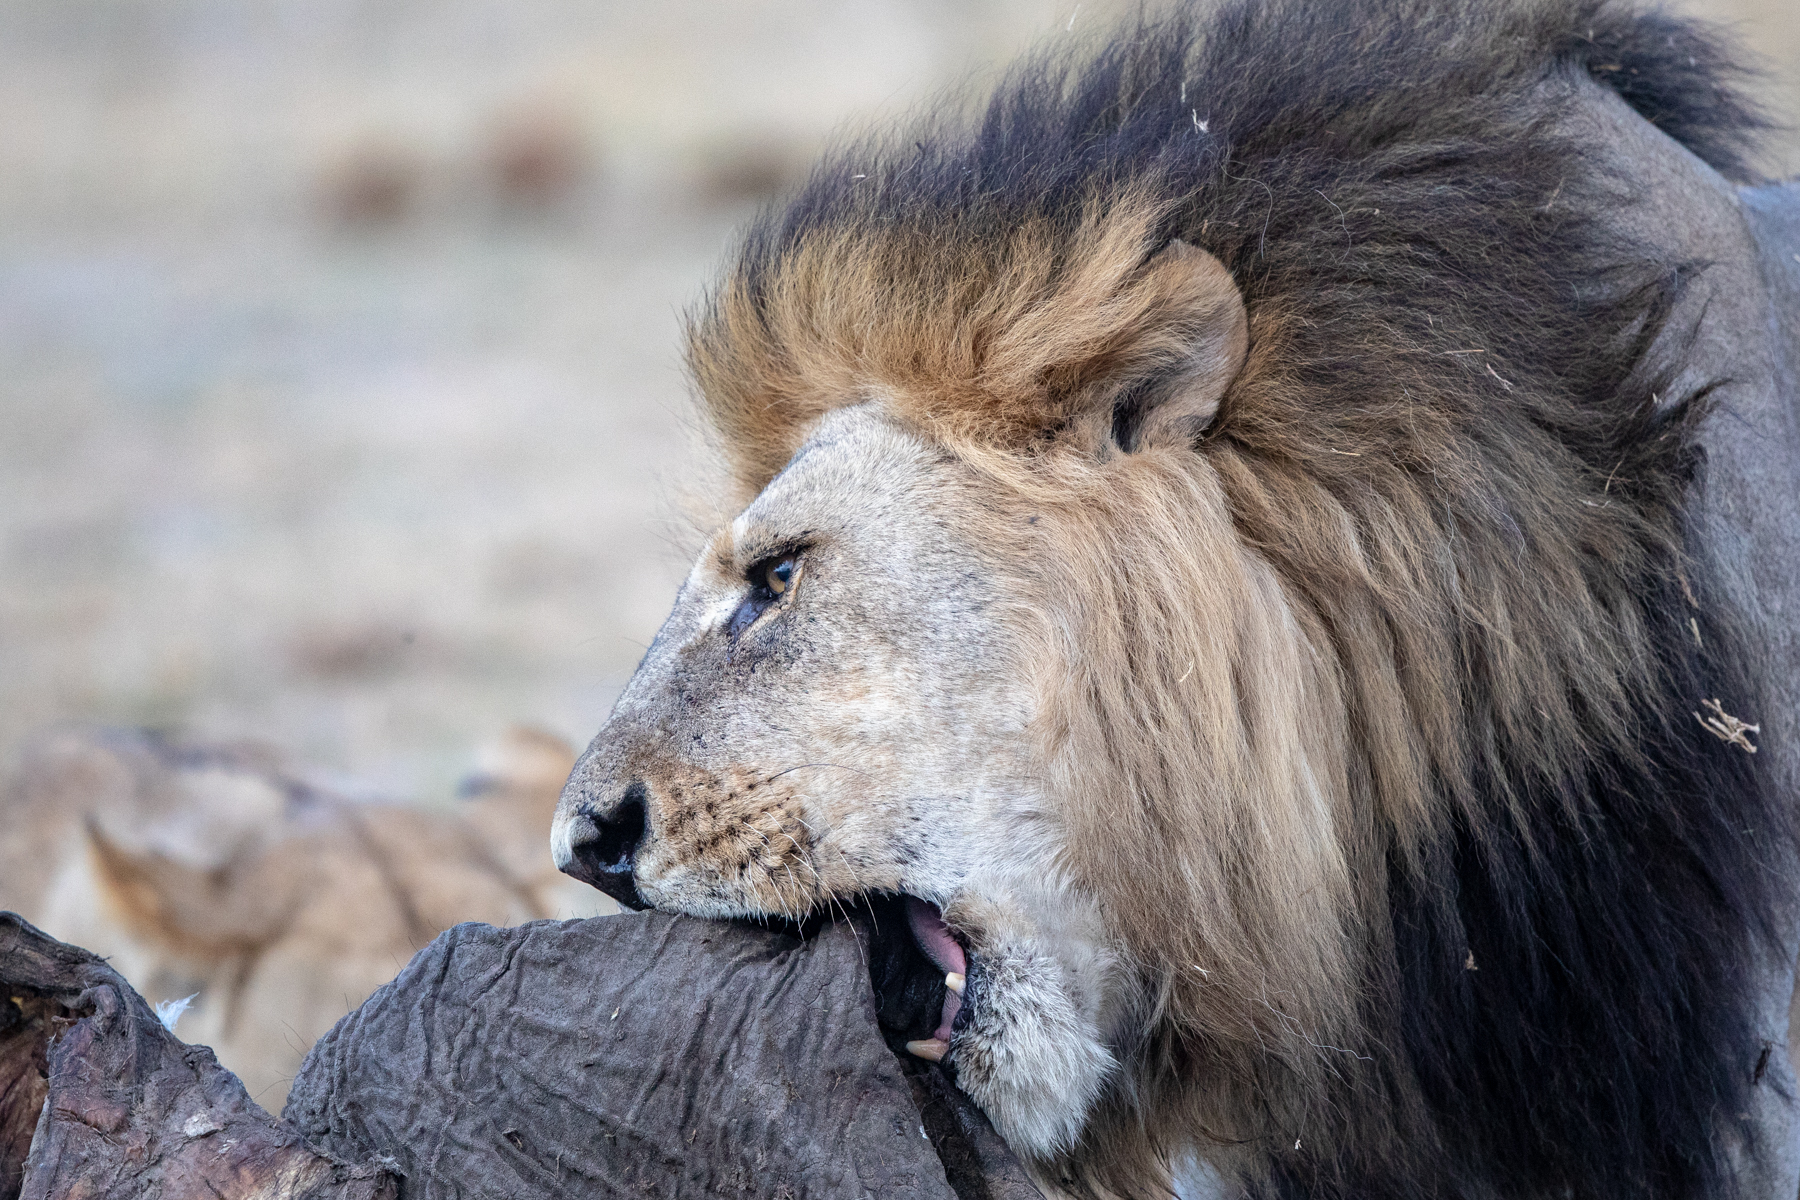 Male Lion chewing away on elephant hide. The darker the mane the more dominant the individual